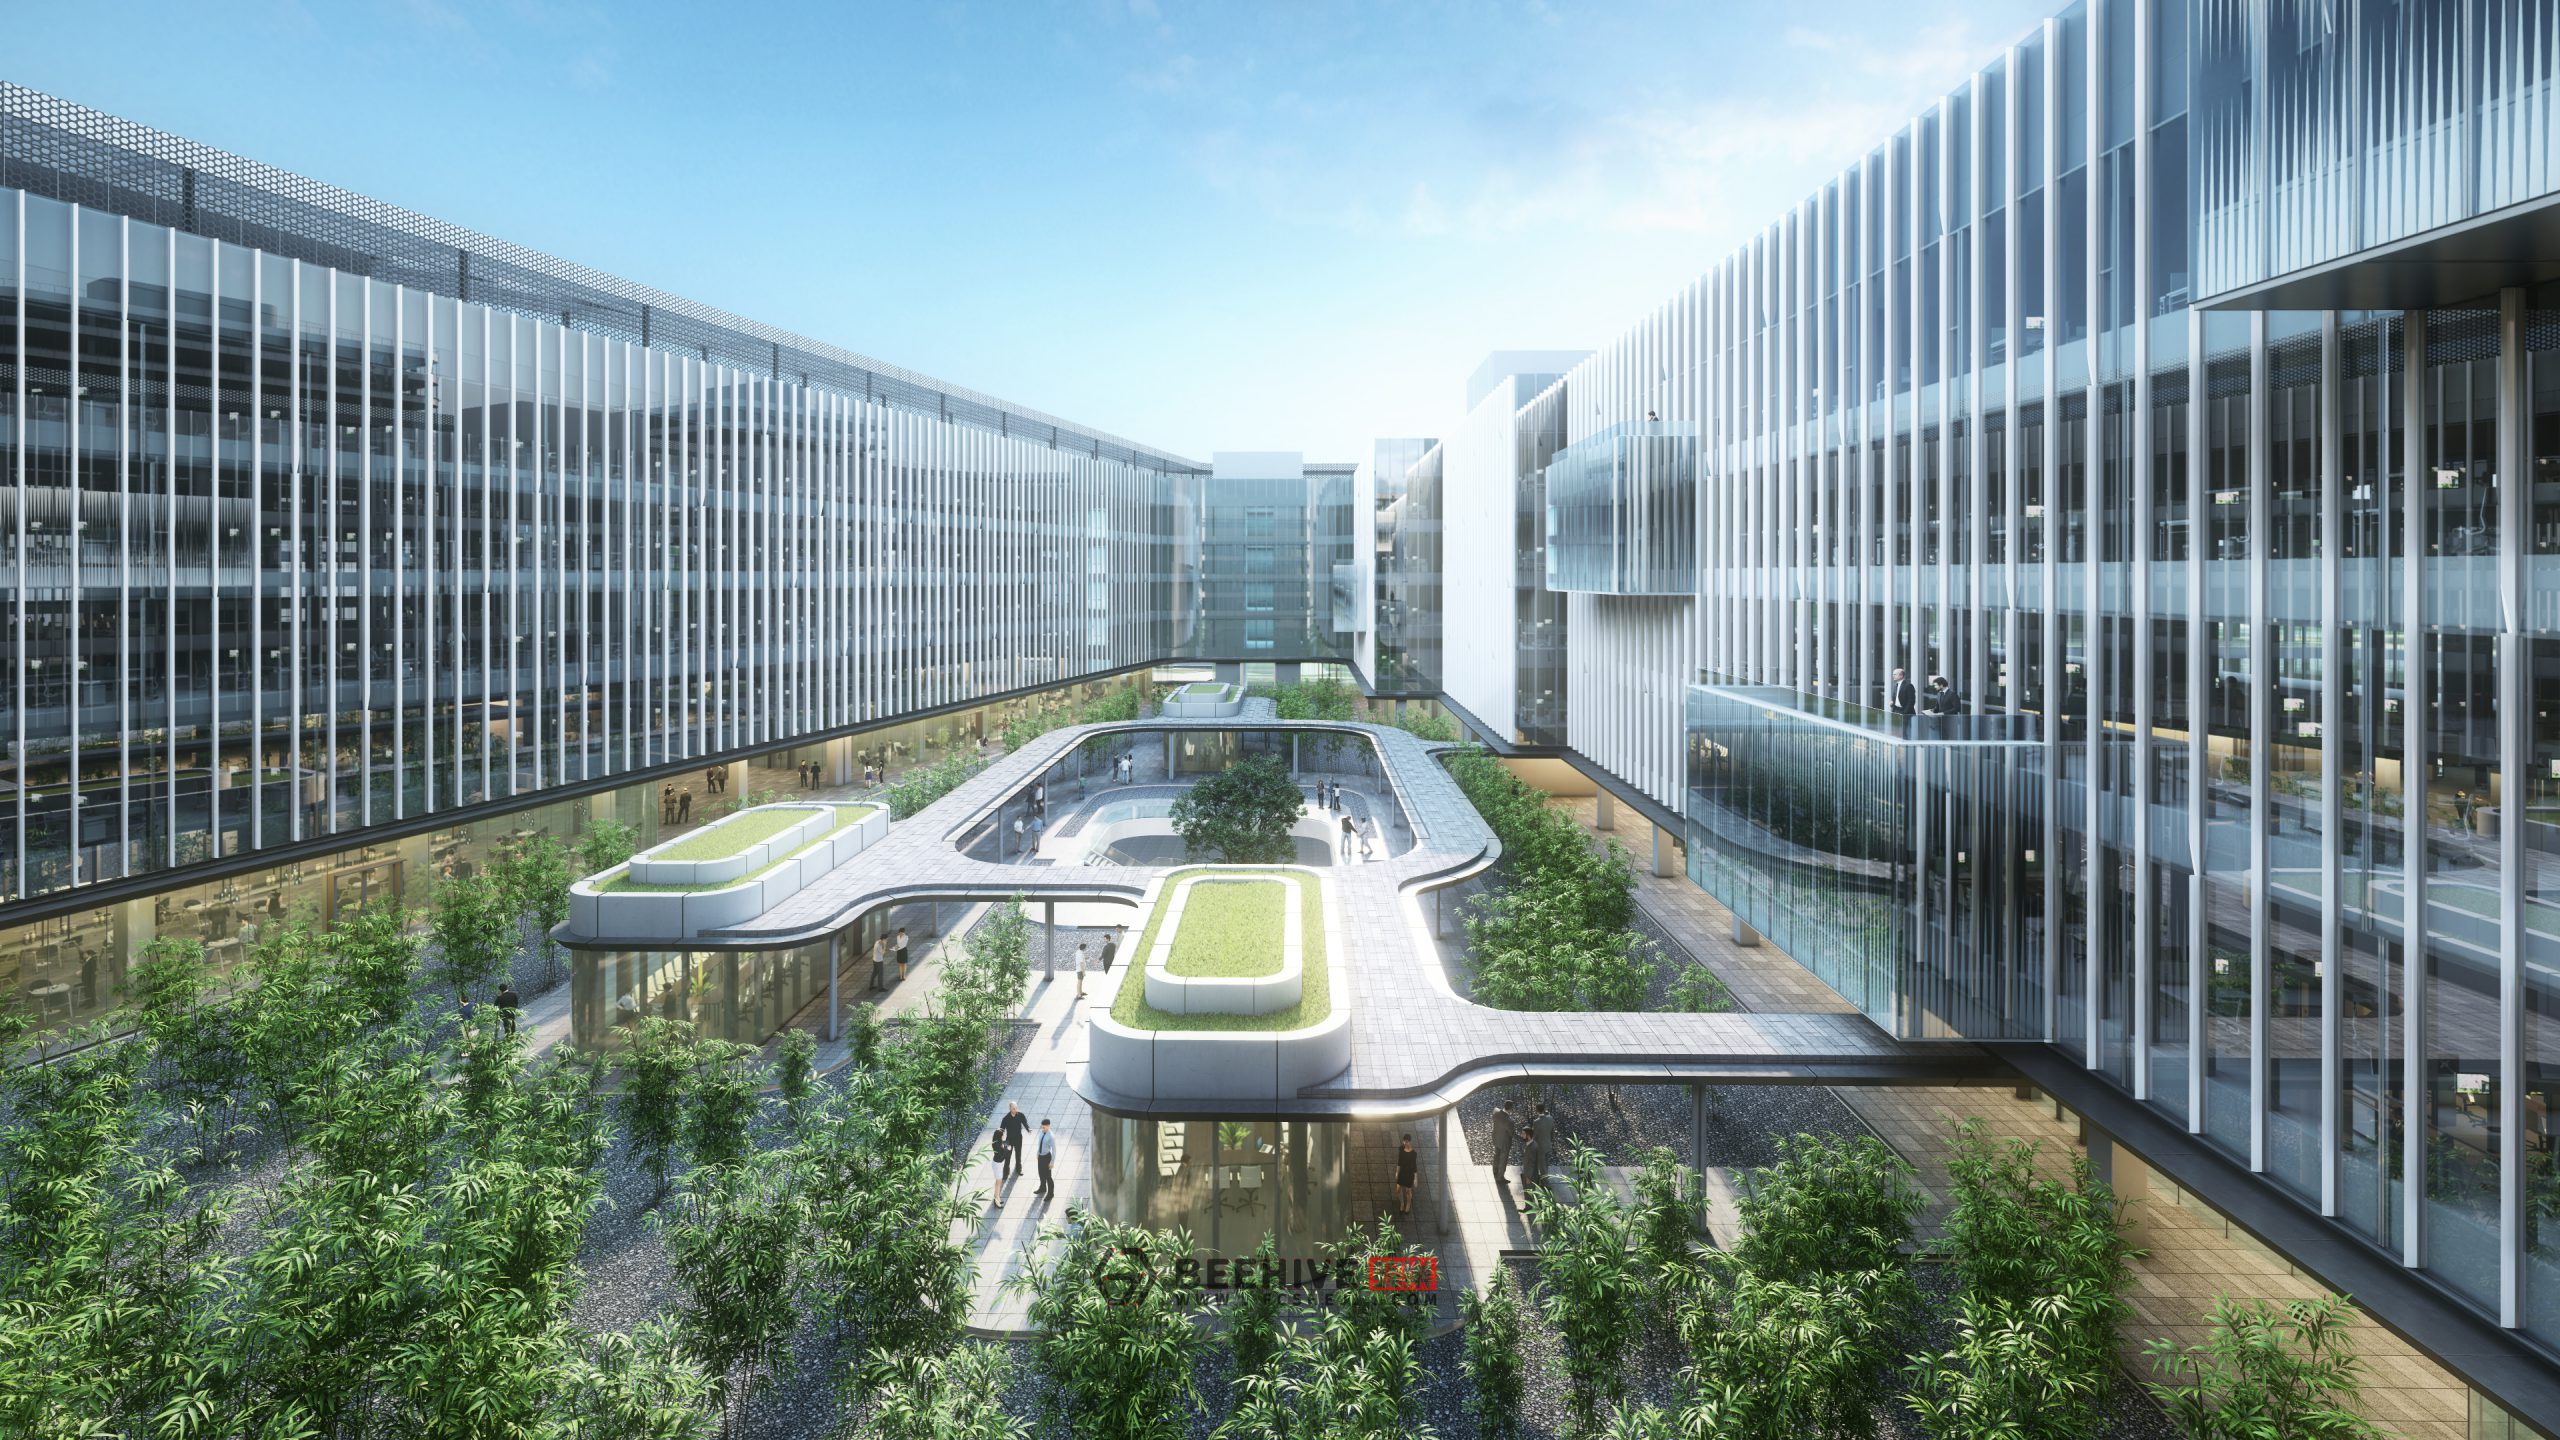 Headquarters and Industry Park for a Renowned Chinese Internet Company. Design and Project Architect: Aedas